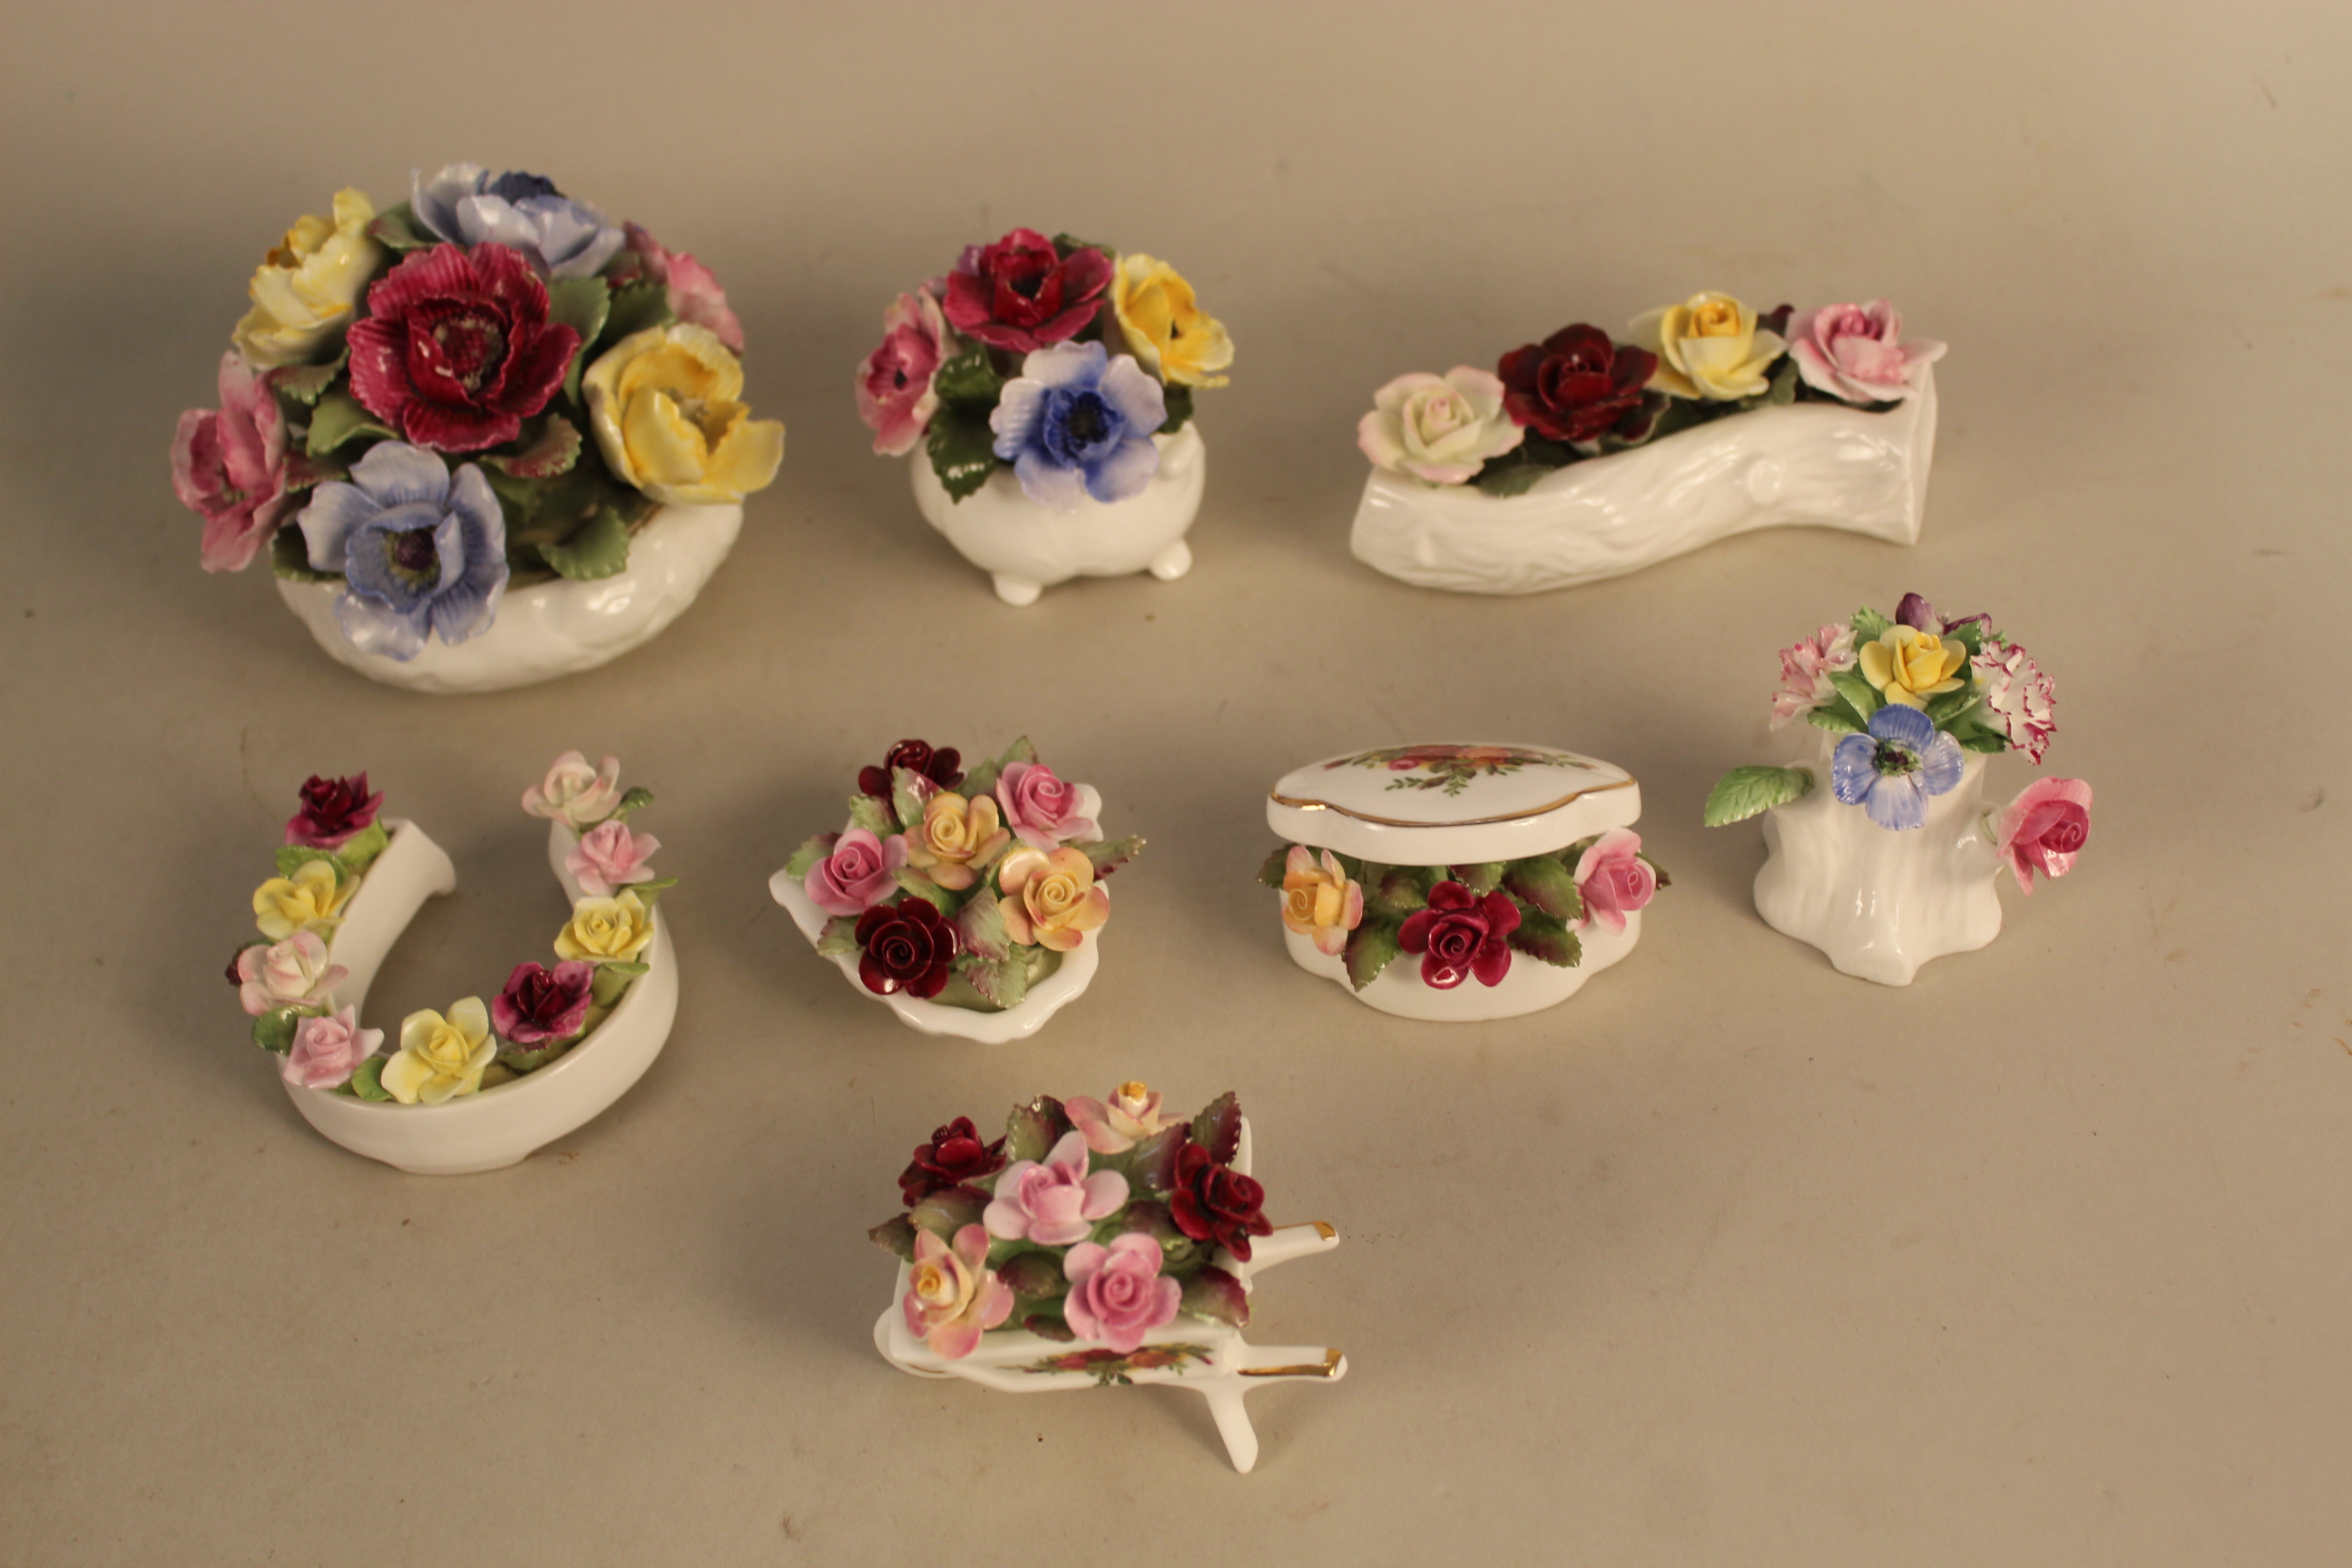 A selection of Chokin ware including lidded vases together with ceramic posies in Royal Albert, - Image 4 of 4